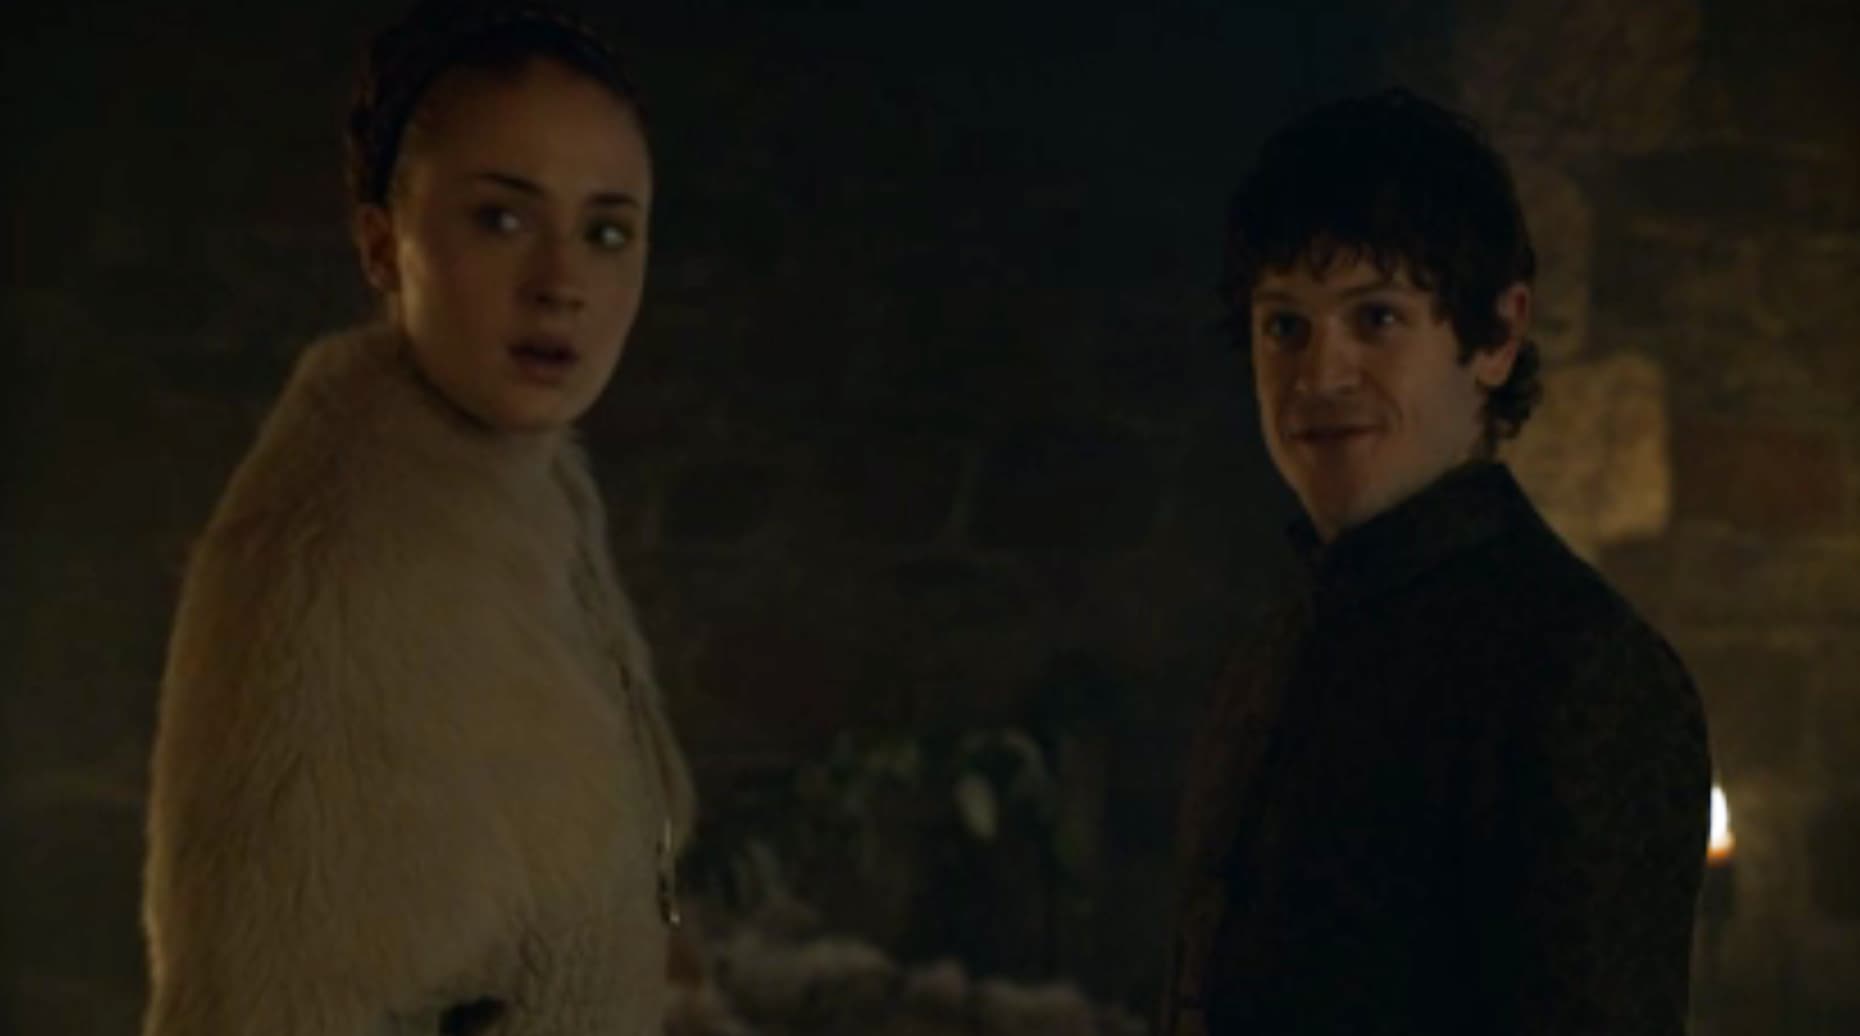 Random Most Uncomfortable Game of Thrones Moments